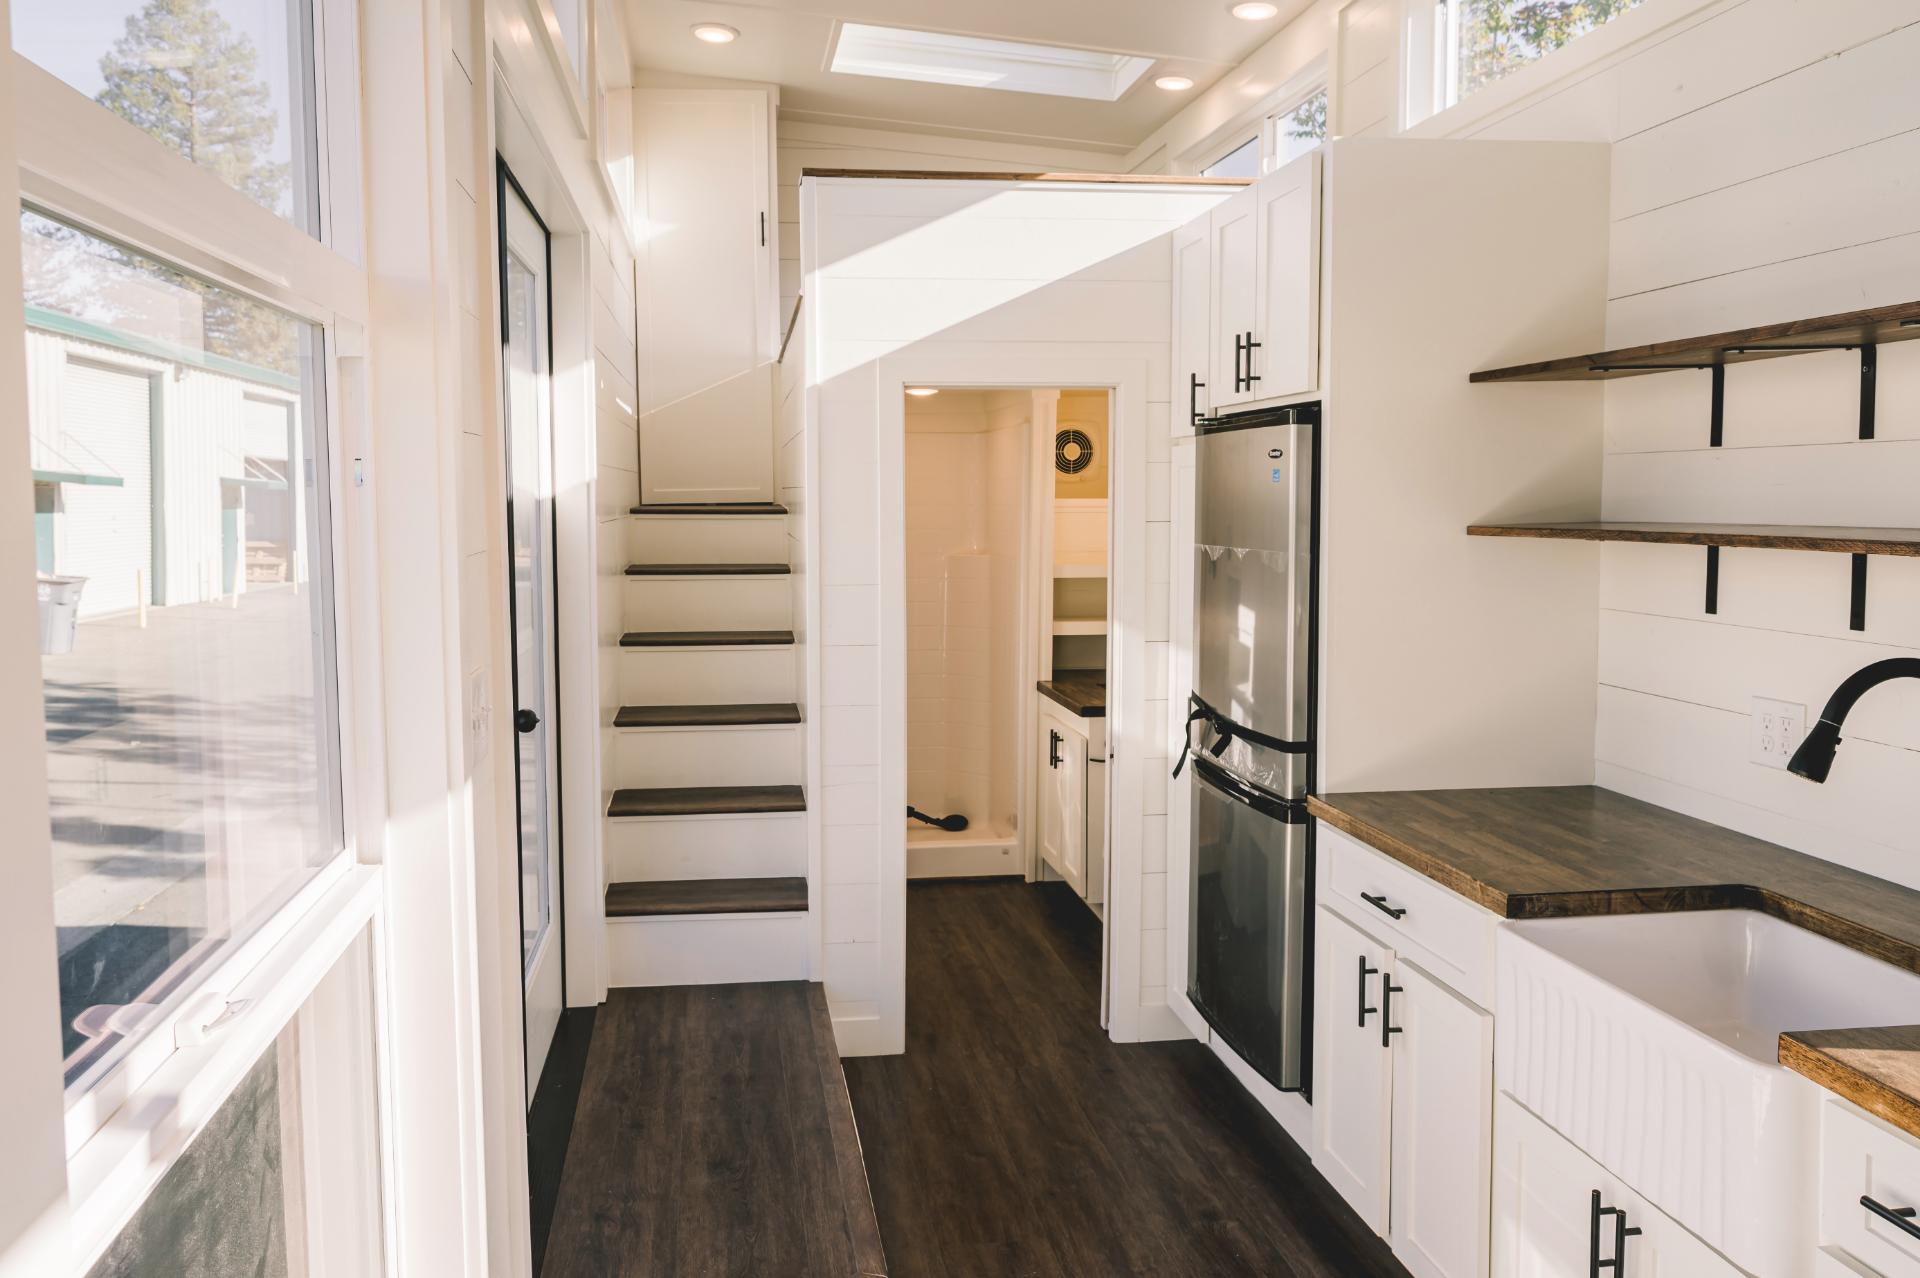 Kitchen and Stairs to Loft - Gallery 30 by California Tiny House